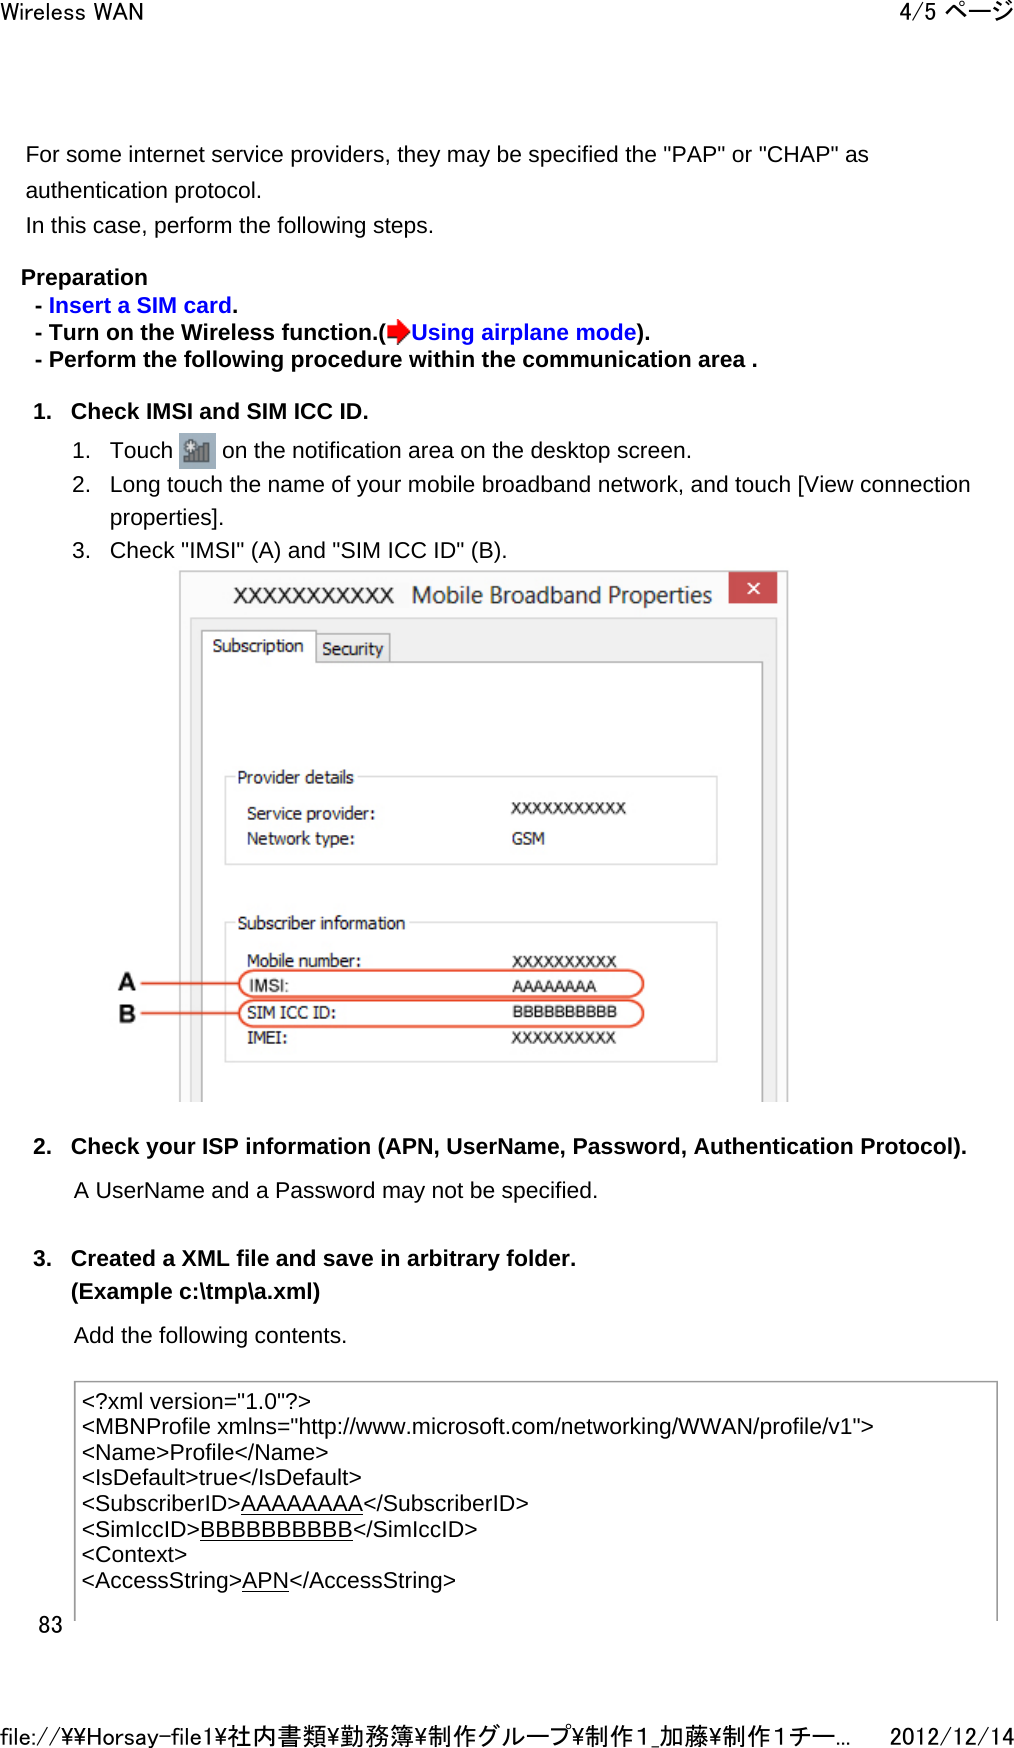 For some internet service providers, they may be specified the &quot;PAP&quot; or &quot;CHAP&quot; as authentication protocol. In this case, perform the following steps.  Preparation - Insert a SIM card. - Turn on the Wireless function.( Using airplane mode). - Perform the following procedure within the communication area . 1. Check IMSI and SIM ICC ID. 1. Touch   on the notification area on the desktop screen.  2. Long touch the name of your mobile broadband network, and touch [View connection properties].  3. Check &quot;IMSI&quot; (A) and &quot;SIM ICC ID&quot; (B).   2. Check your ISP information (APN, UserName, Password, Authentication Protocol). A UserName and a Password may not be specified. 3. Created a XML file and save in arbitrary folder. (Example c:\tmp\a.xml) Add the following contents.  &lt;?xml version=&quot;1.0&quot;?&gt; &lt;MBNProfile xmlns=&quot;http://www.microsoft.com/networking/WWAN/profile/v1&quot;&gt; &lt;Name&gt;Profile&lt;/Name&gt; &lt;IsDefault&gt;true&lt;/IsDefault&gt; &lt;SubscriberID&gt;AAAAAAAA&lt;/SubscriberID&gt; &lt;SimIccID&gt;BBBBBBBBBB&lt;/SimIccID&gt; &lt;Context&gt; &lt;AccessString&gt;APN&lt;/AccessString&gt; 4/5 ページWireless WAN2012/12/14file://\\Horsay-file1\社内書類\勤務簿\制作グループ\制作１_加藤\制作１チー...83